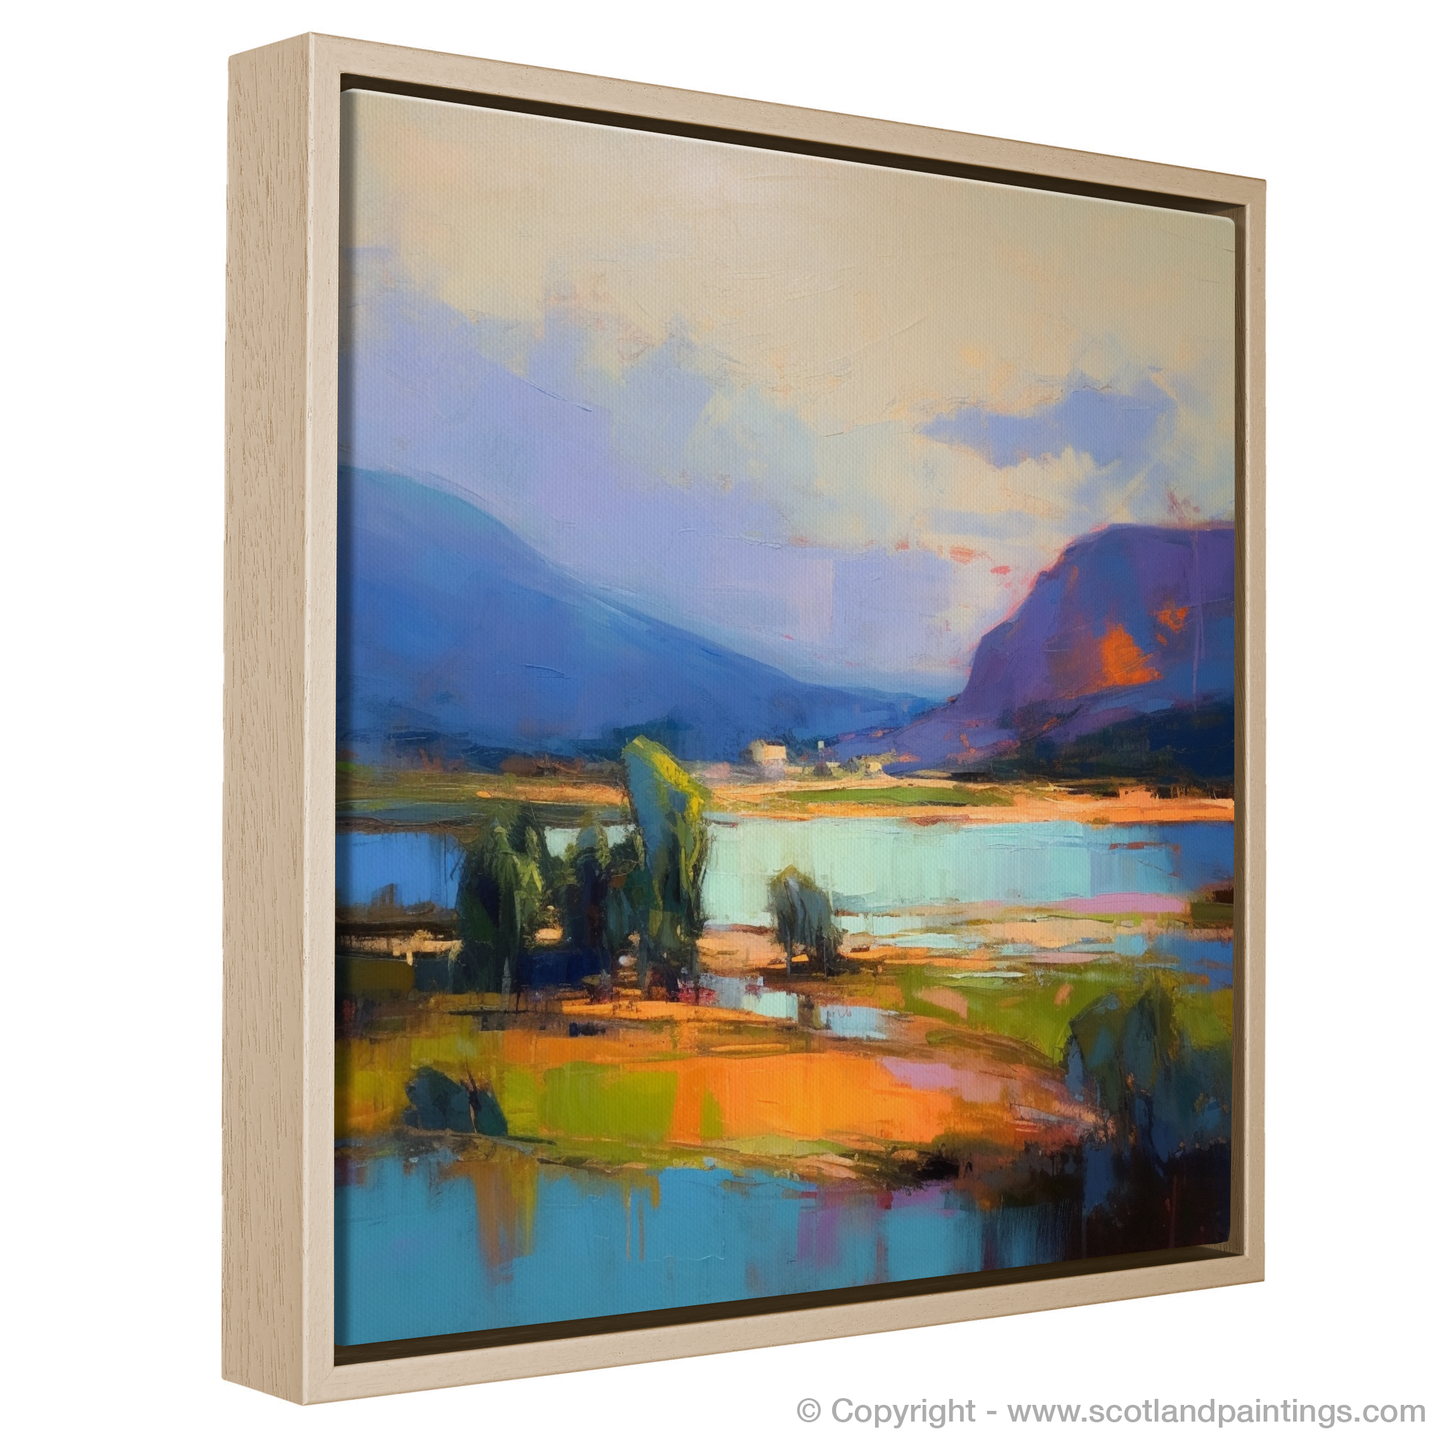 Summer's Embrace: An Expressionist Journey through Loch Tay